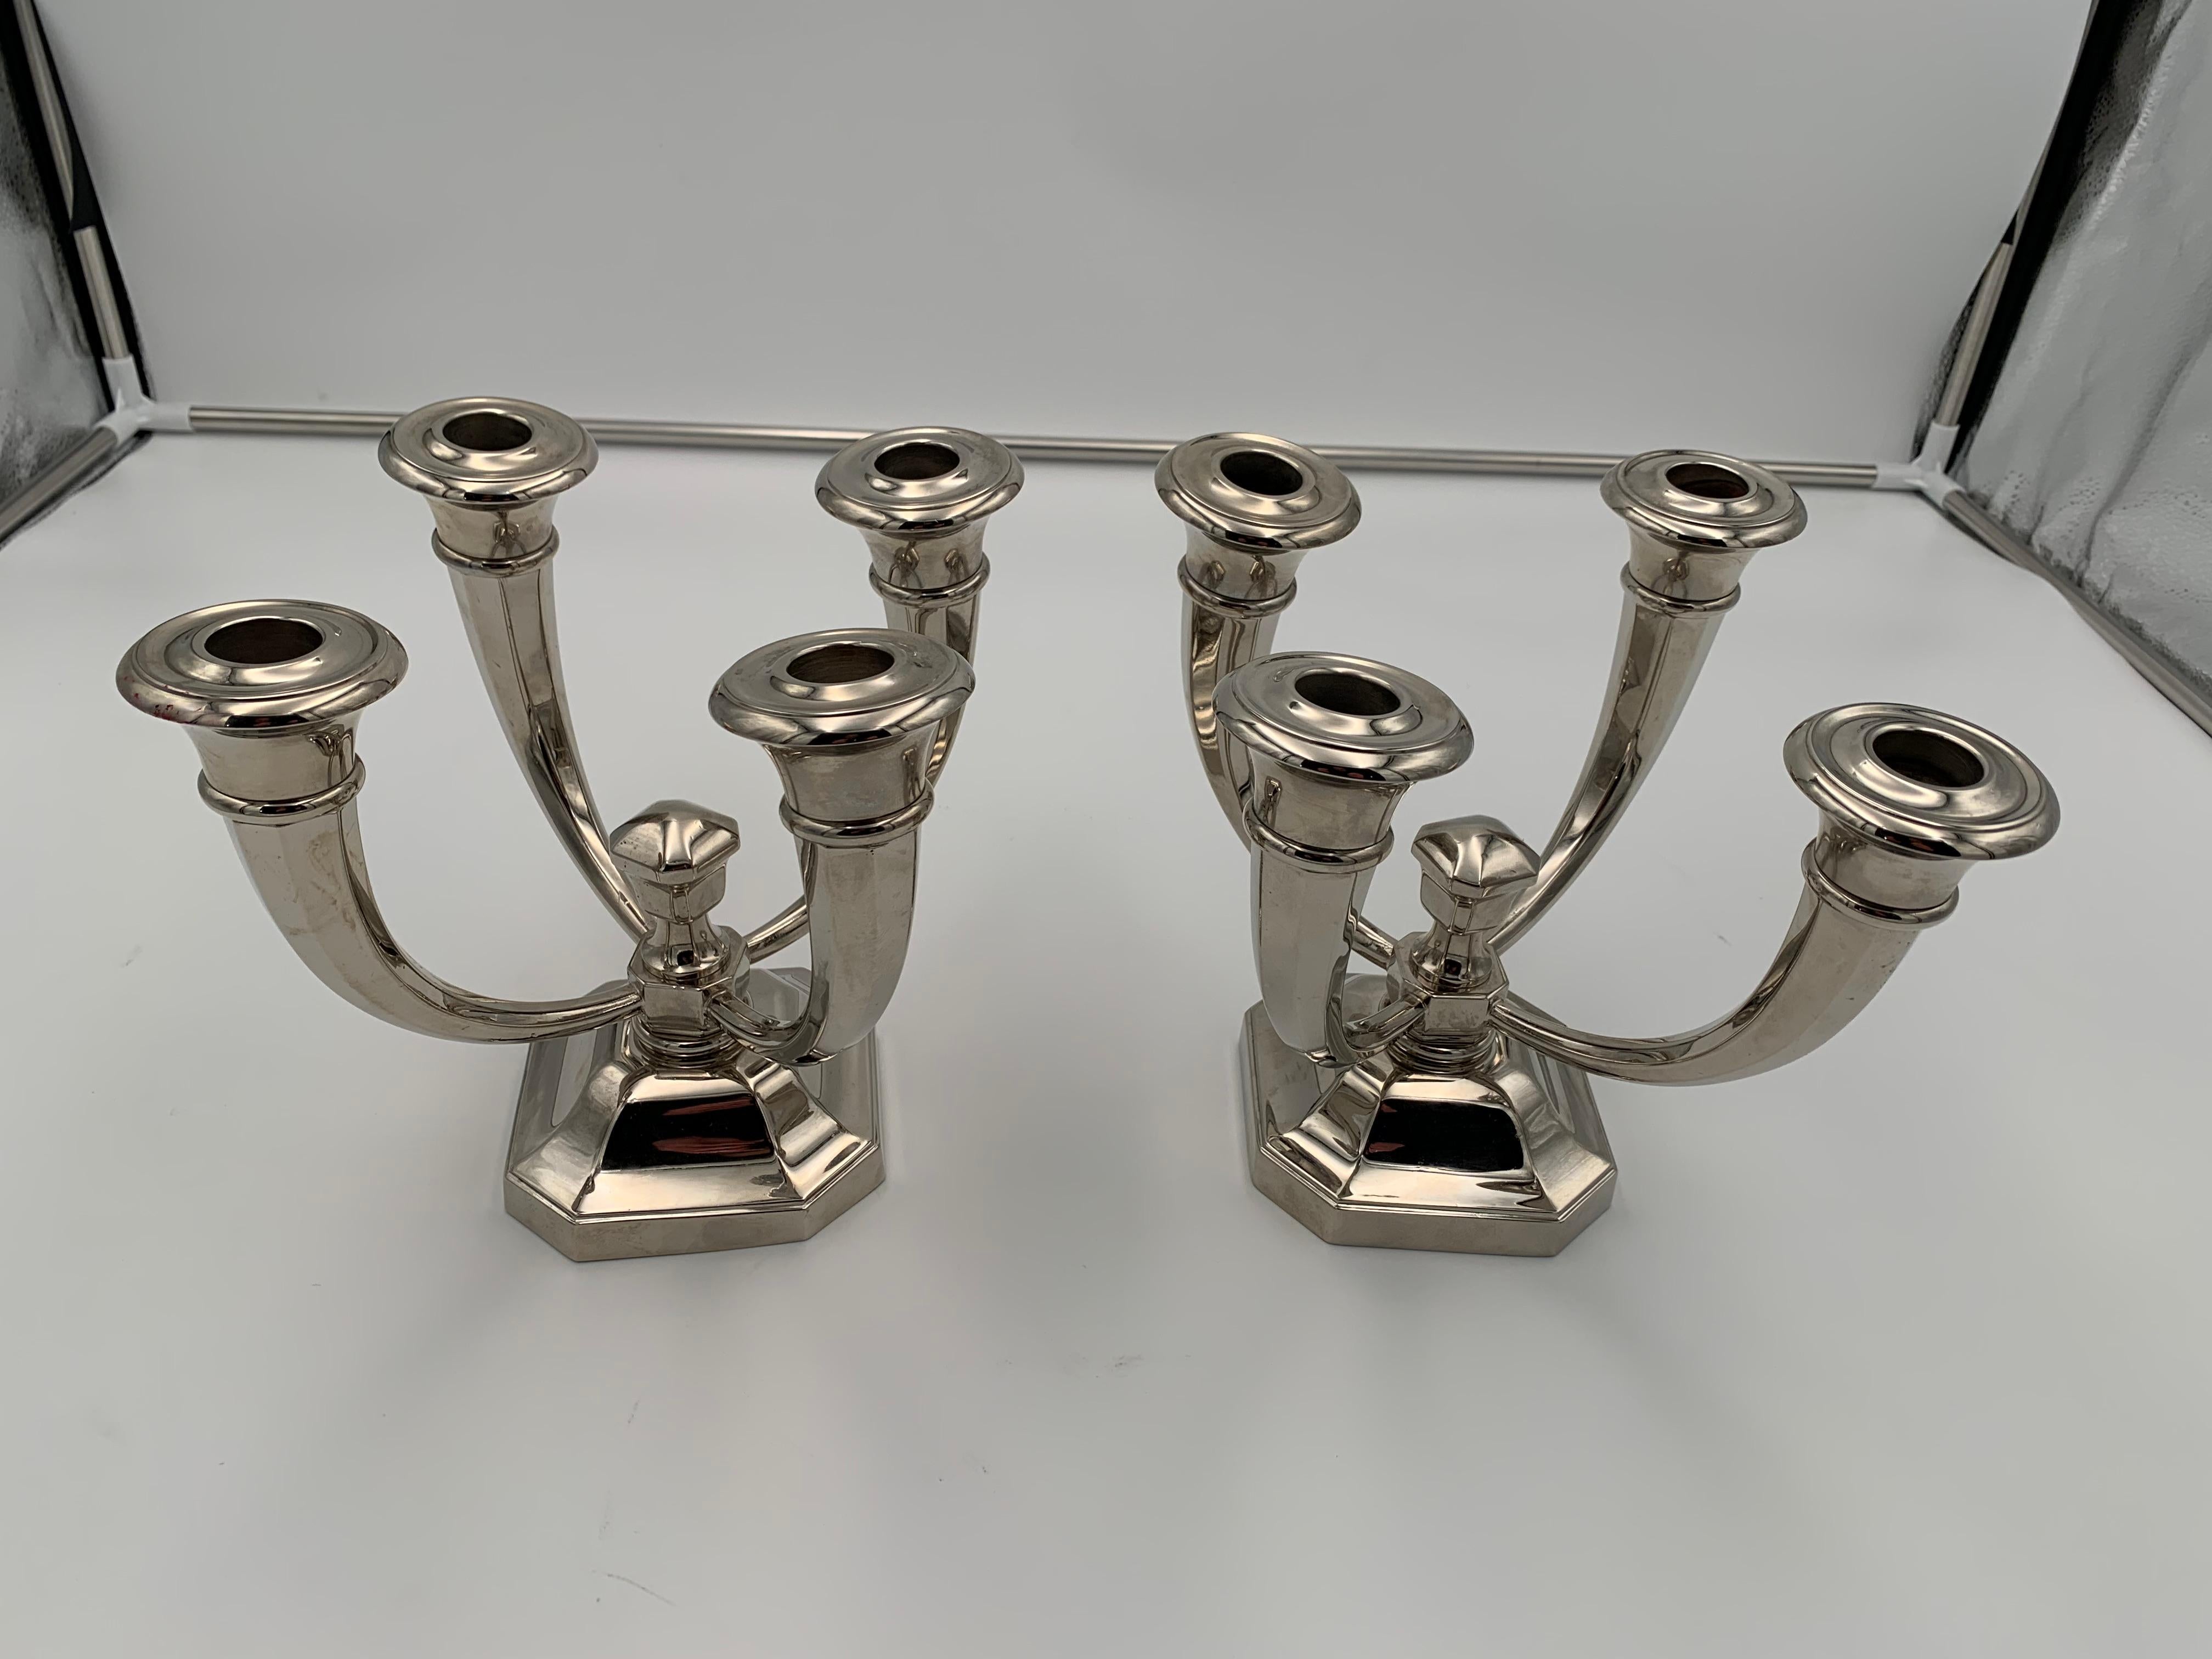 Galvanized Pair of Art Deco Candlesticks by J. Leleu, Nickel-Plate, Bronze, France, c. 1930 For Sale